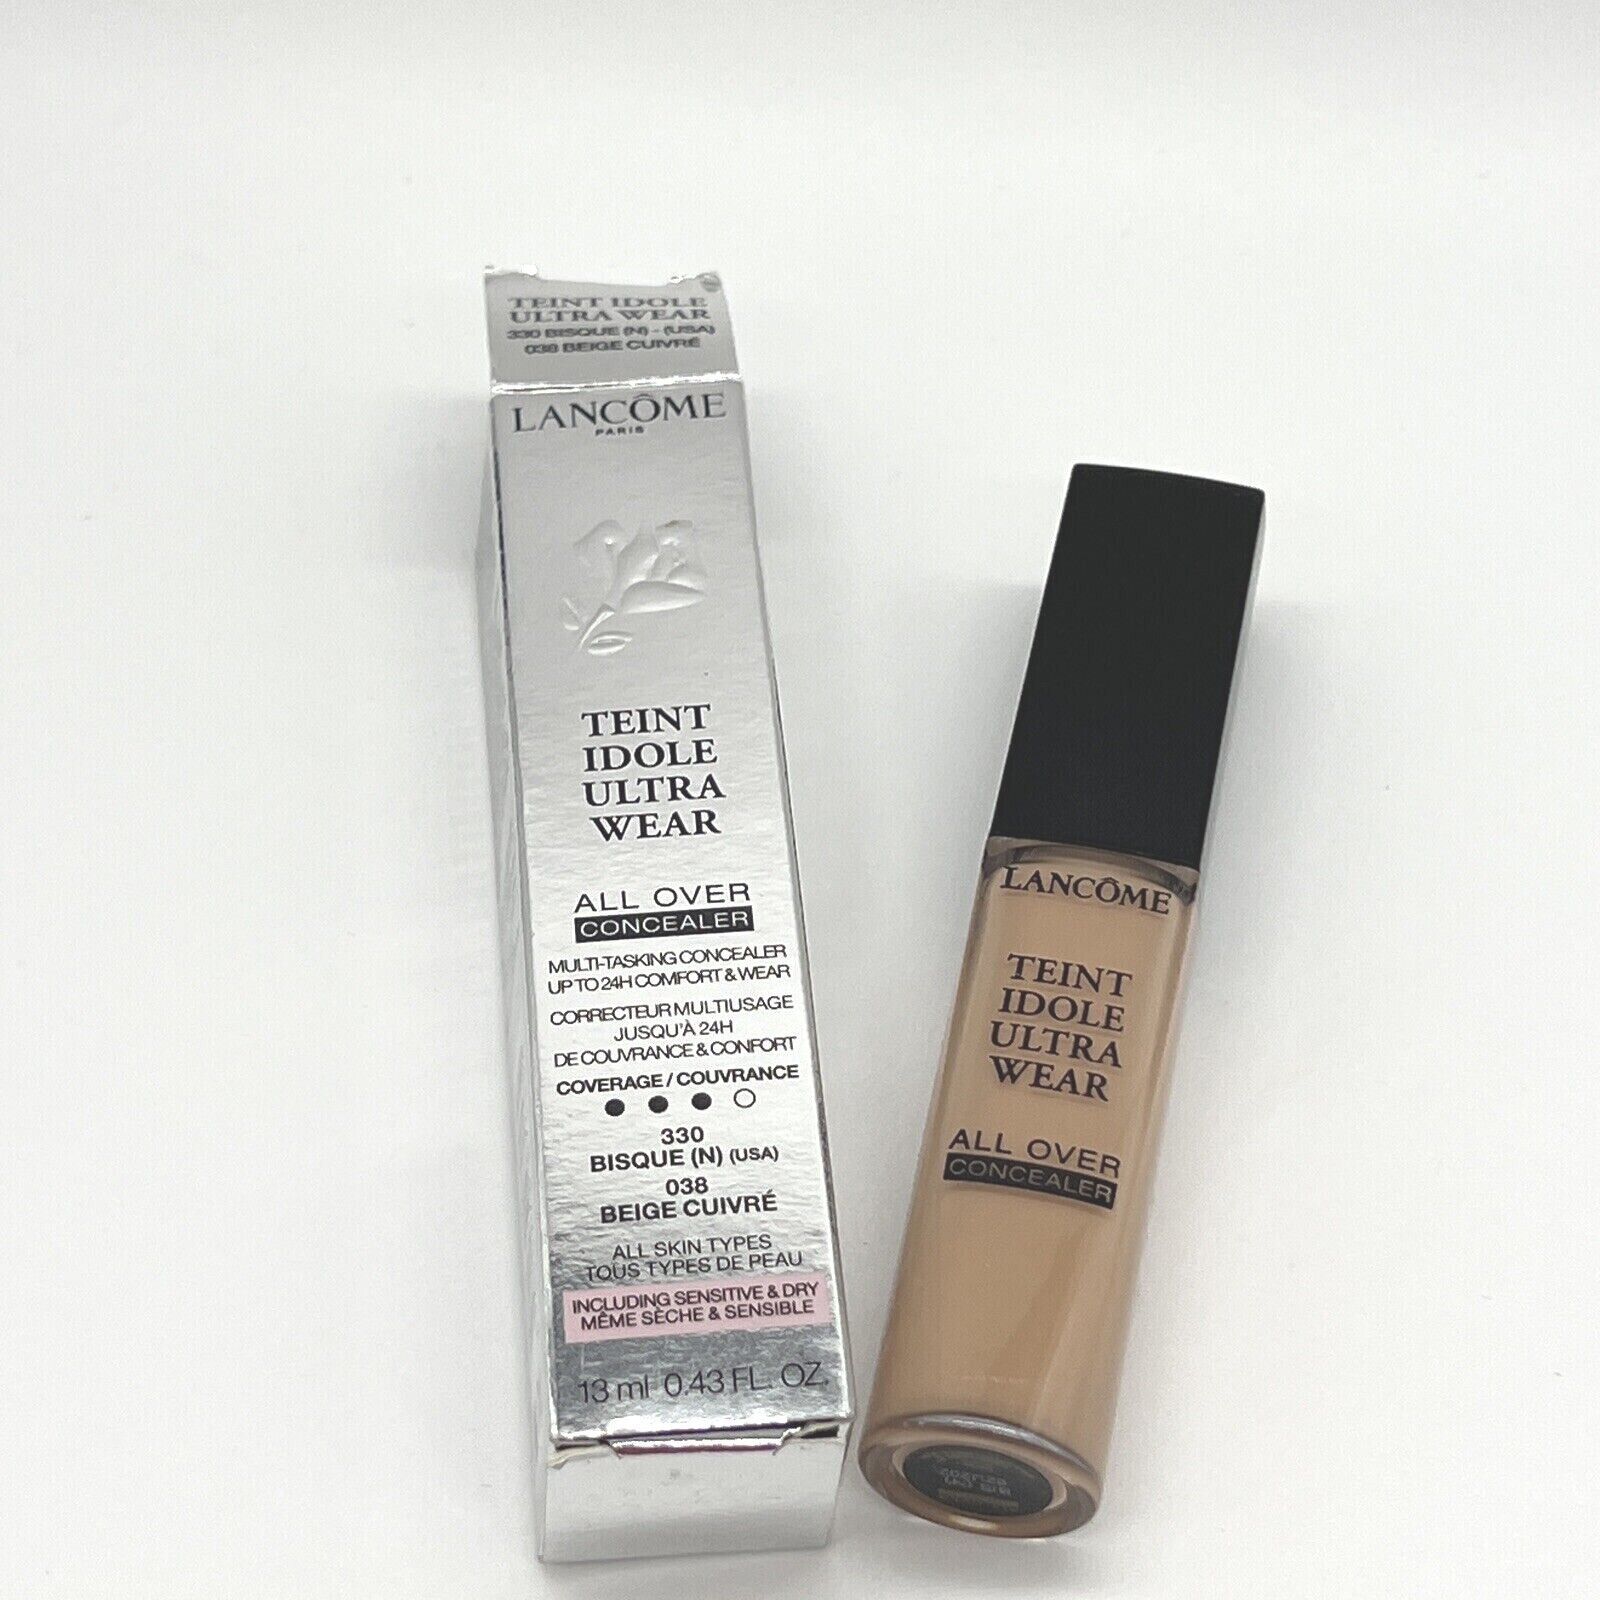 Primary image for Lancome Teint Idole Ultra Wear All Over Concealer ~ 330 Bisque (N) ~ 13 ml, NEW